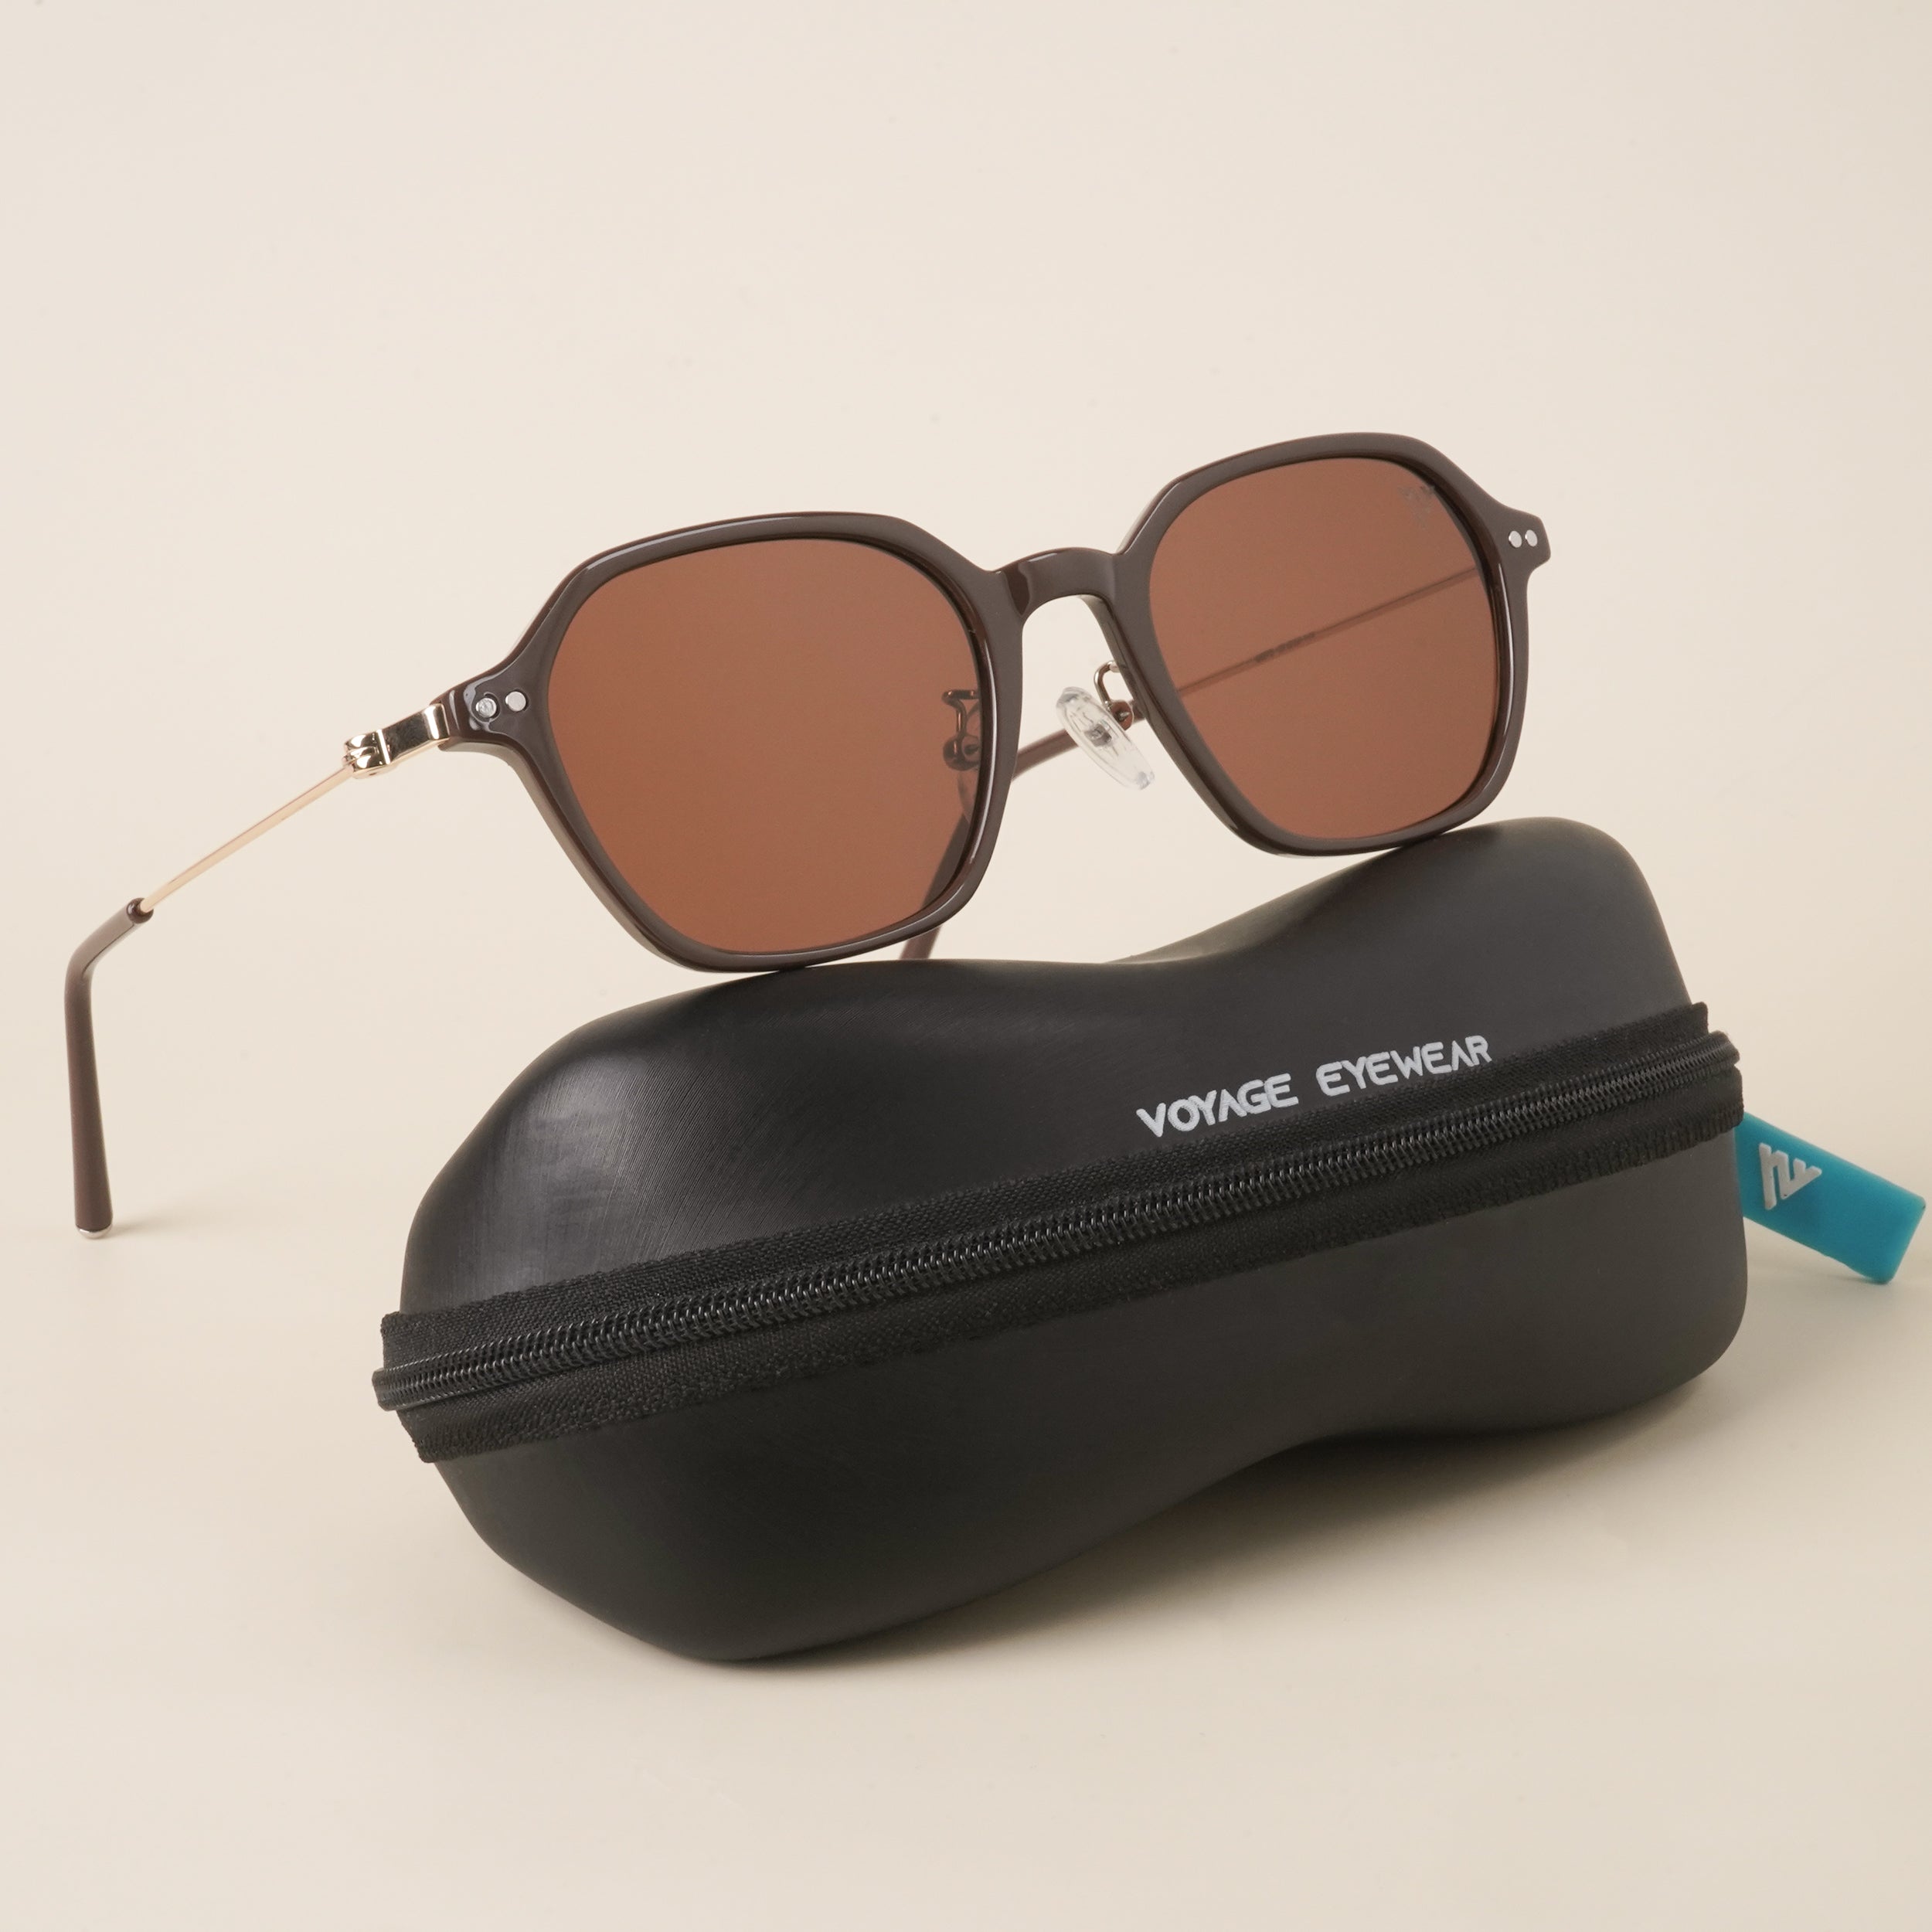 Voyage Brown Oval Sunglasses - MG3889